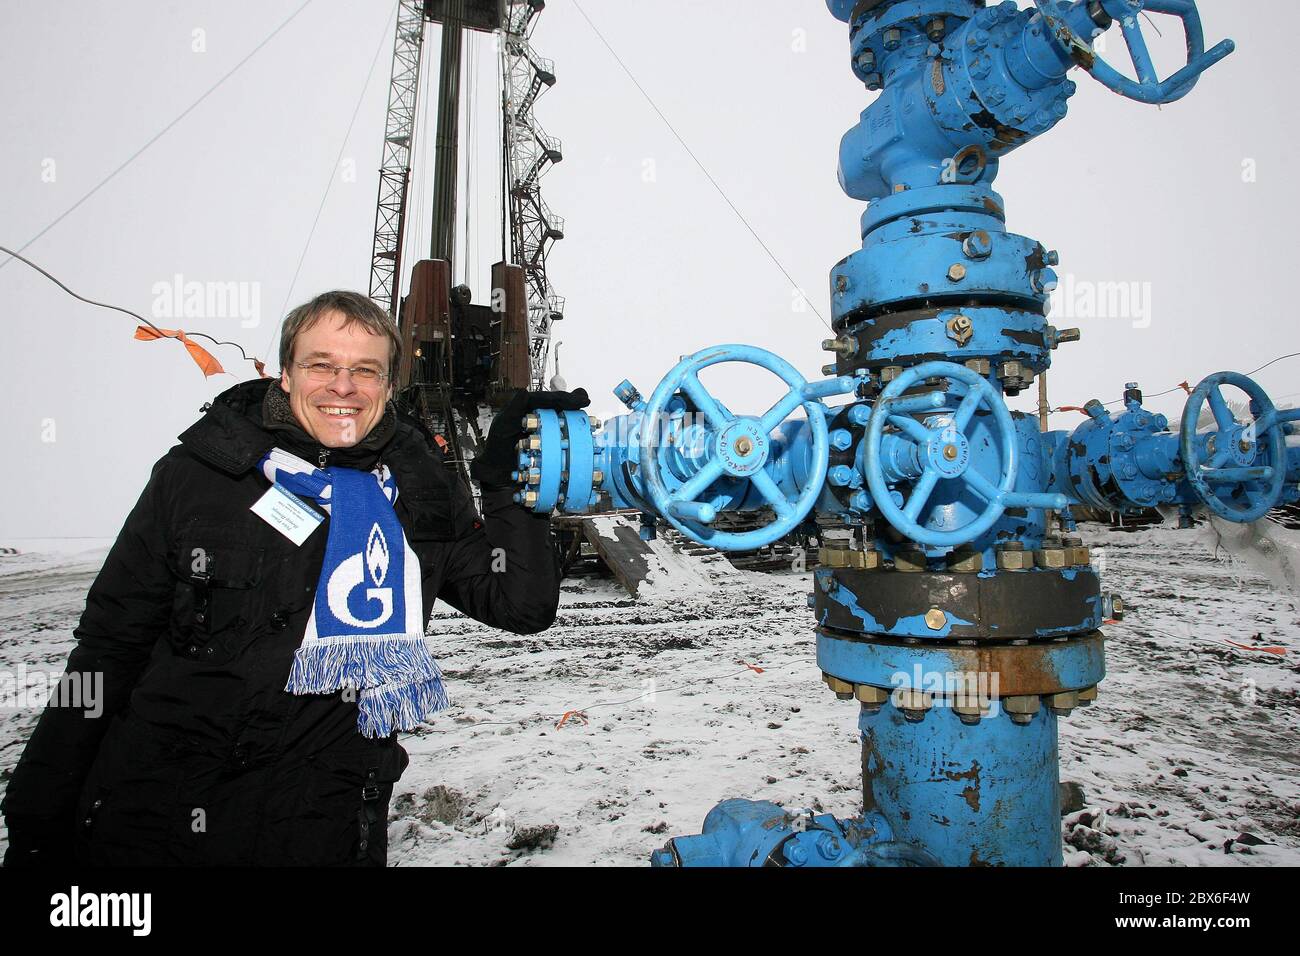 firo Football: 23.03.2007 1.Bundesliga, season 2006/2007 Russia, Russia trip FC Schalke o4 trip at the invitation of sponsor GAZPROM to Moscow, Siberia, St. Petersburg Peter PETERS in front of borehole no. 922, Bohrturm, JAMBURG our general terms and conditions apply, can be viewed at www.firosportphoto.de copyright by firo sportphoto: Pfefferackerstr. 2a 45894 Gelsenkirchen www.firosportphoto.de mail@firosportphoto.de (Volksbank Bochum-Witten) Bank code: 430 601 29 Kt.Nr .: 341 117 100 Tel: 0209 - 9304402 Fax: 0209 - 9304443 | usage worldwide Stock Photo